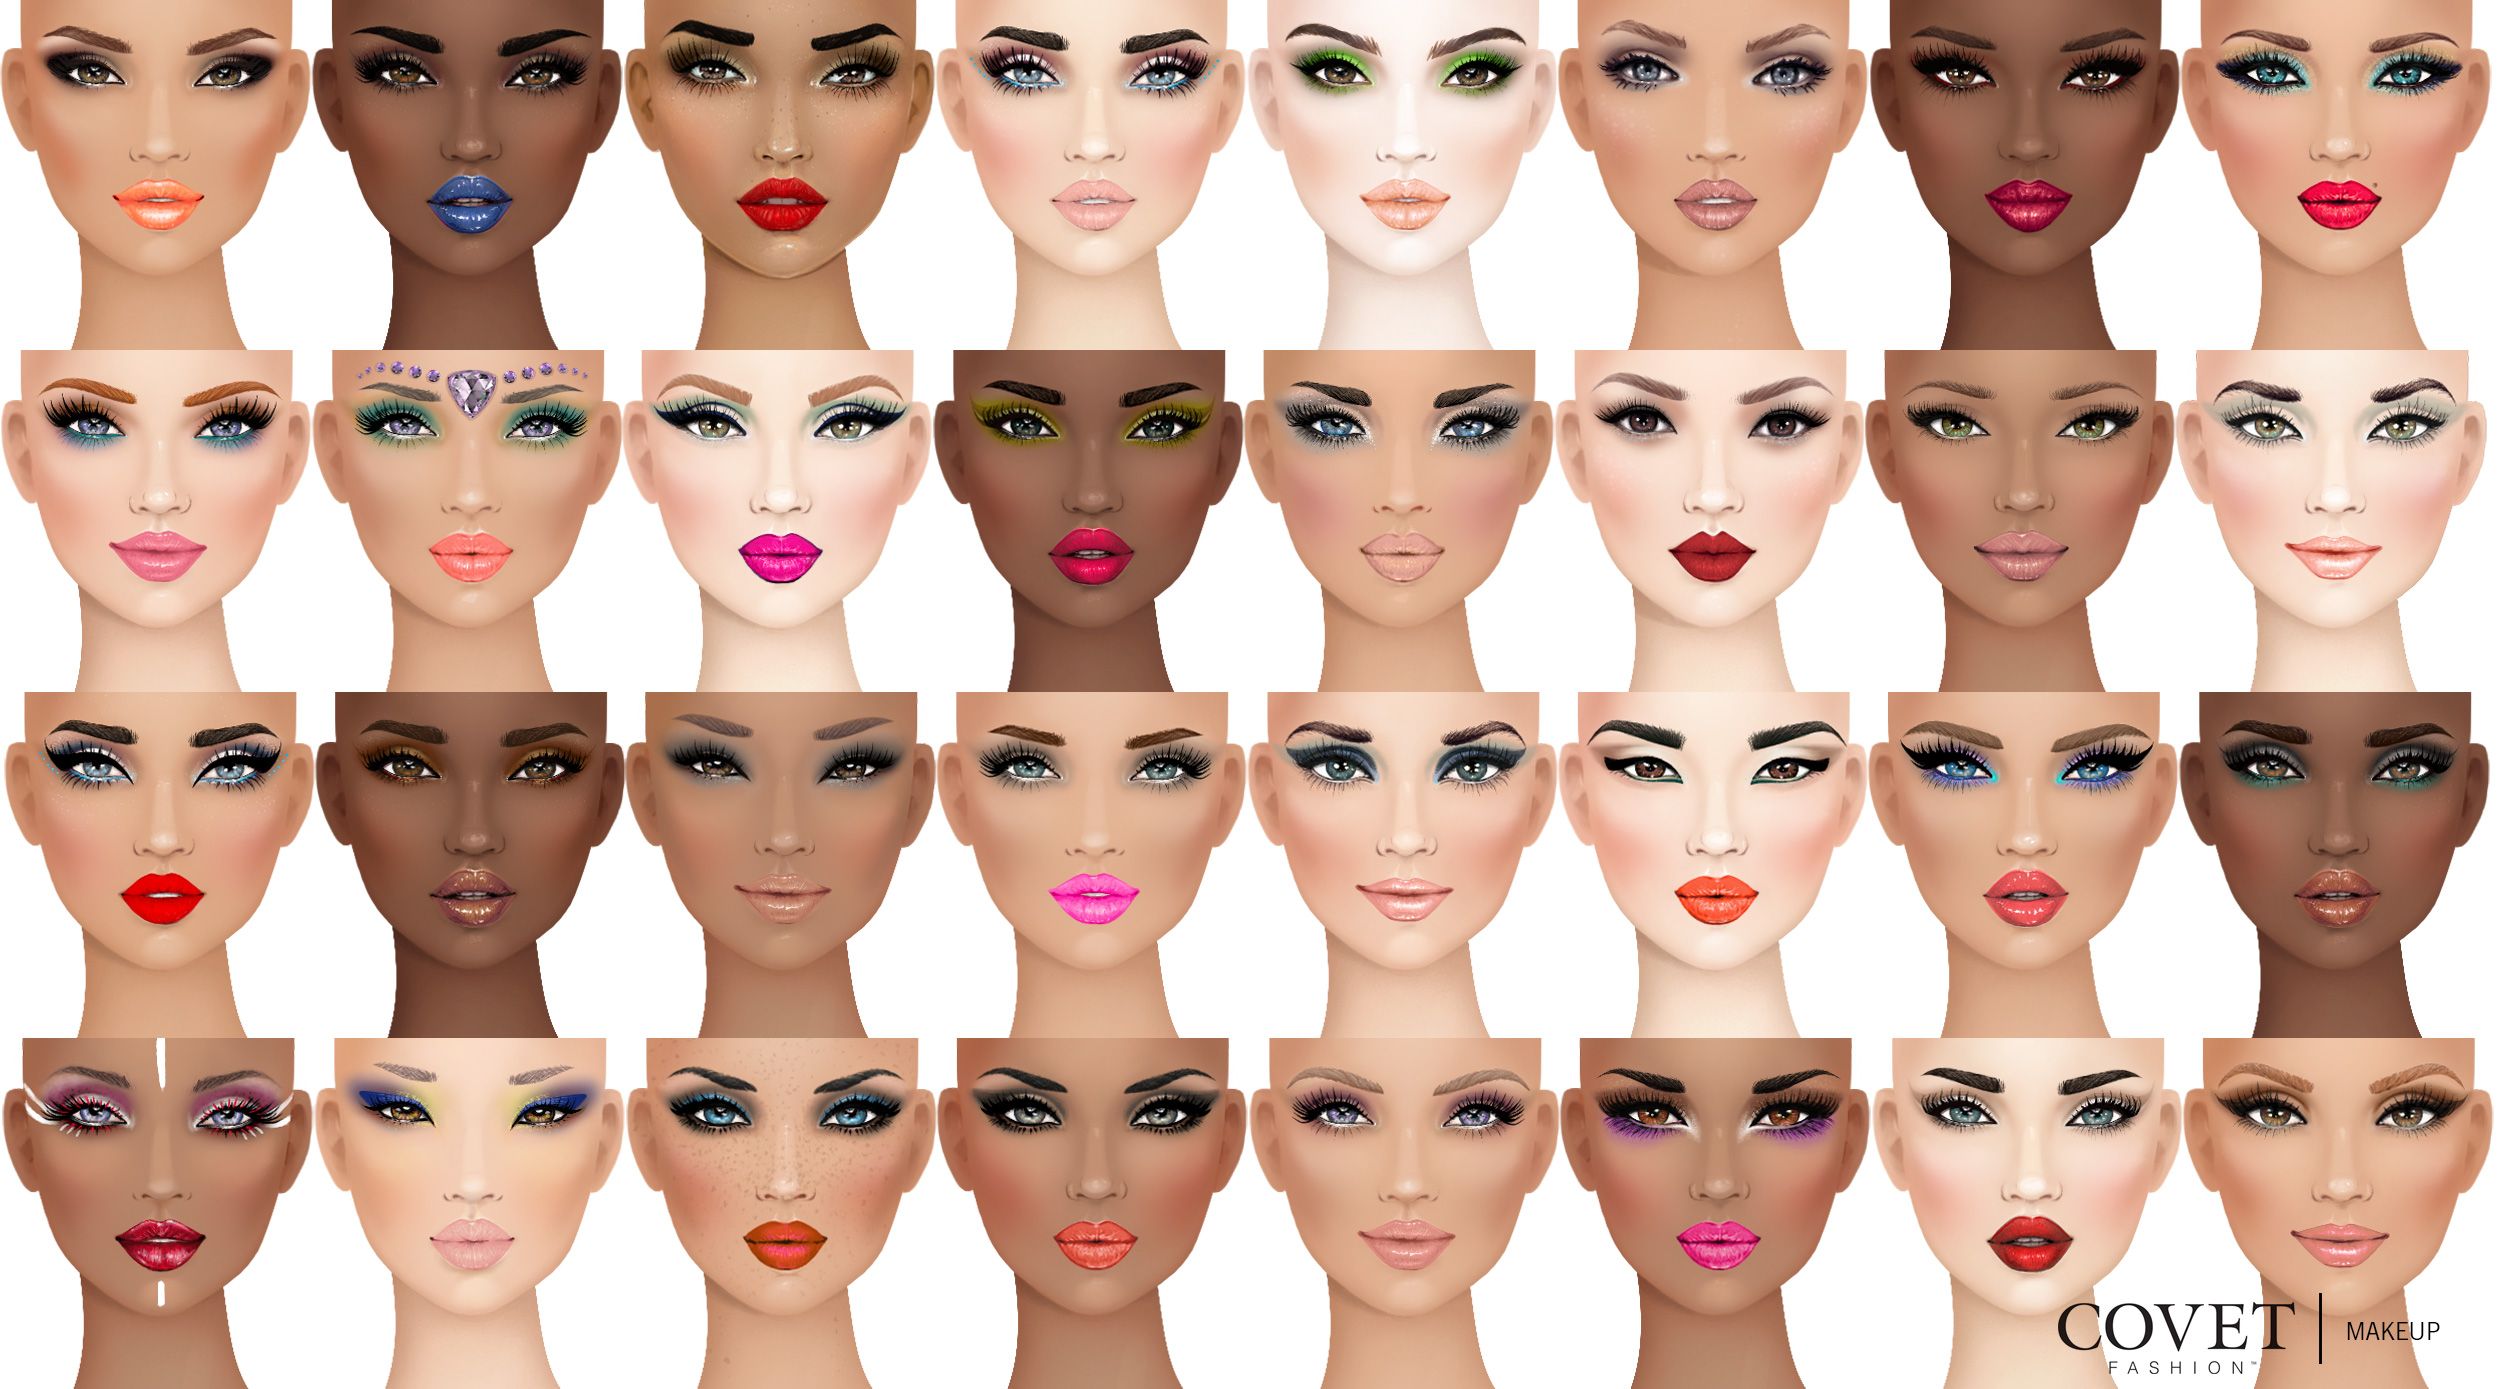 Makeup wallpapers Covet fashion Makeup tools products